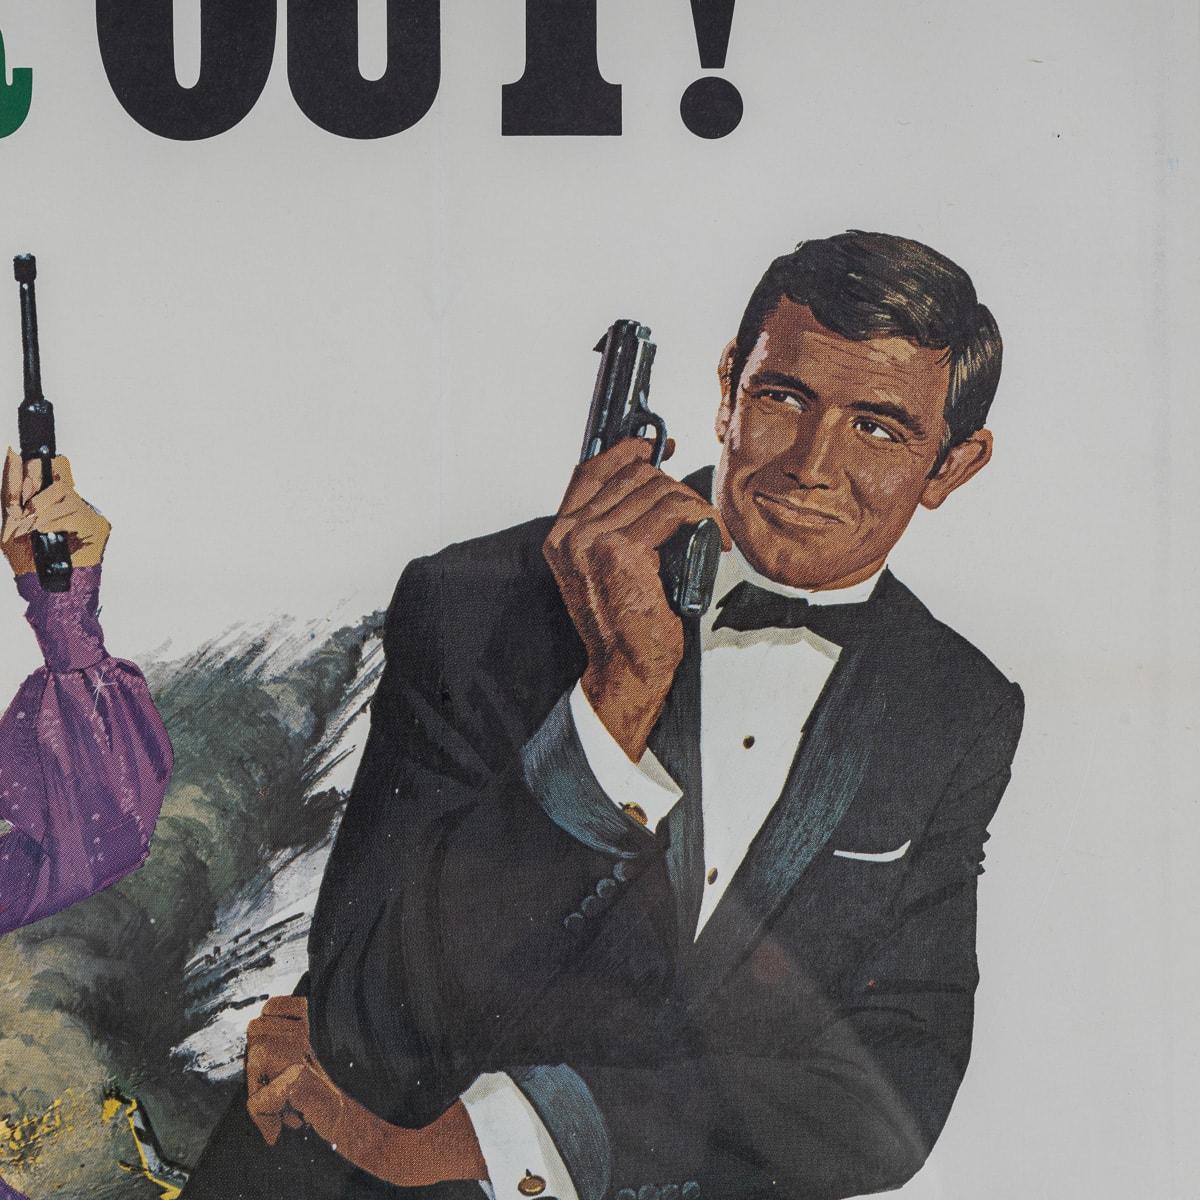 U.S Release James Bond 007 'On Her Majesty's Secret Service' Poster c.1969 In Good Condition For Sale In Royal Tunbridge Wells, Kent